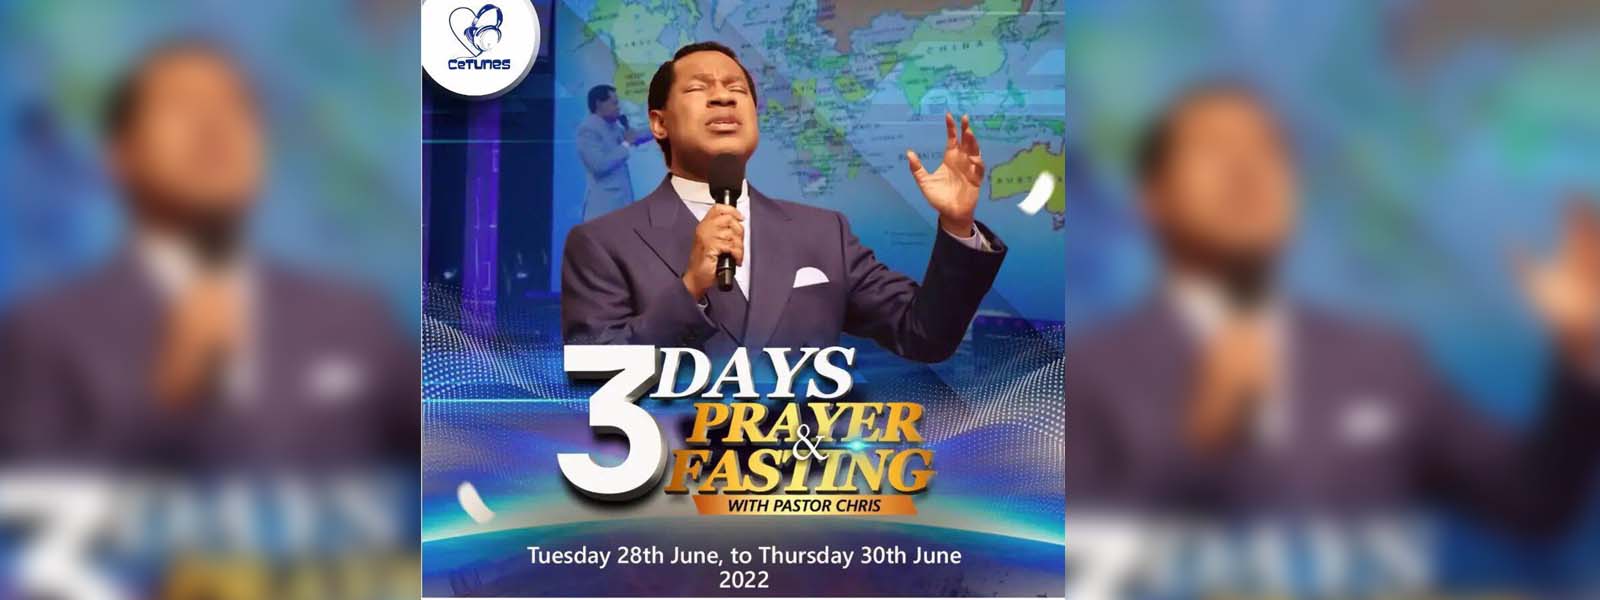 3 DAYS OF PRAYER AND FASTING WITH PASTOR CHRIS